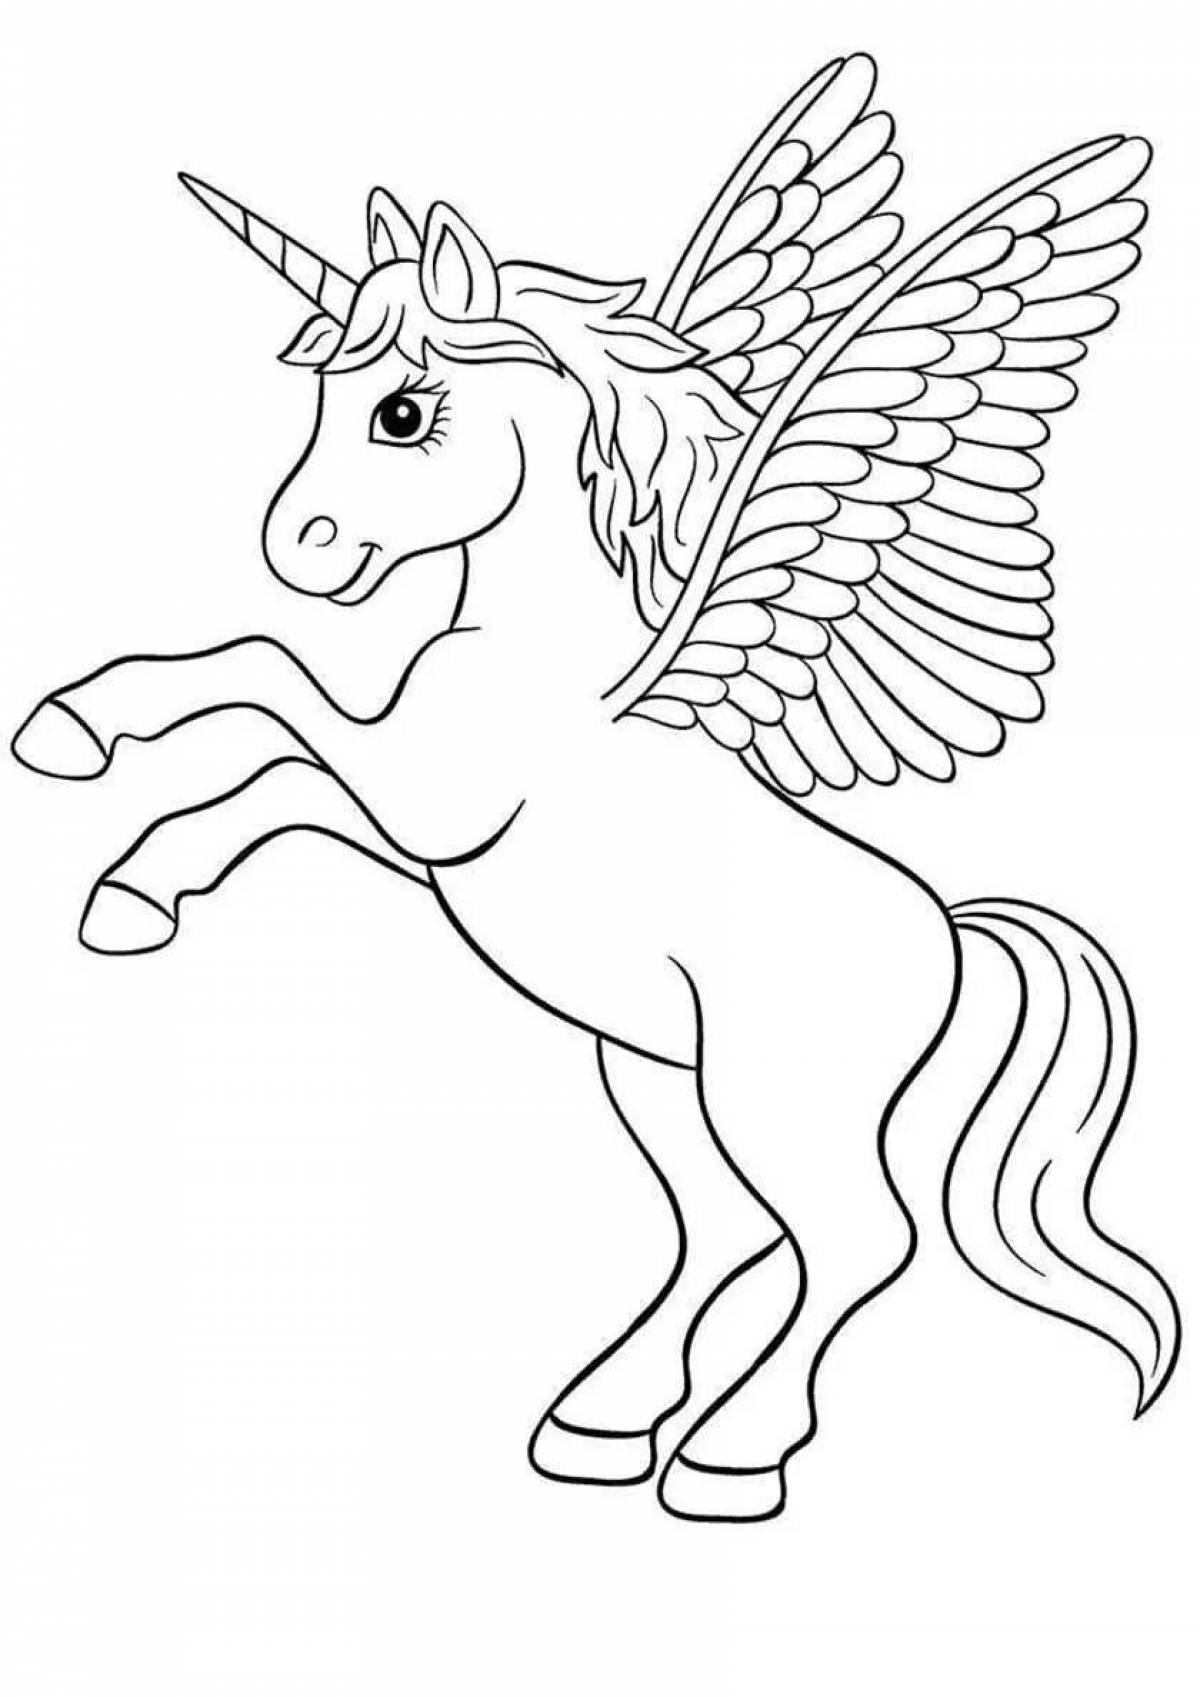 Fascinating coloring unicorn with wings for kids